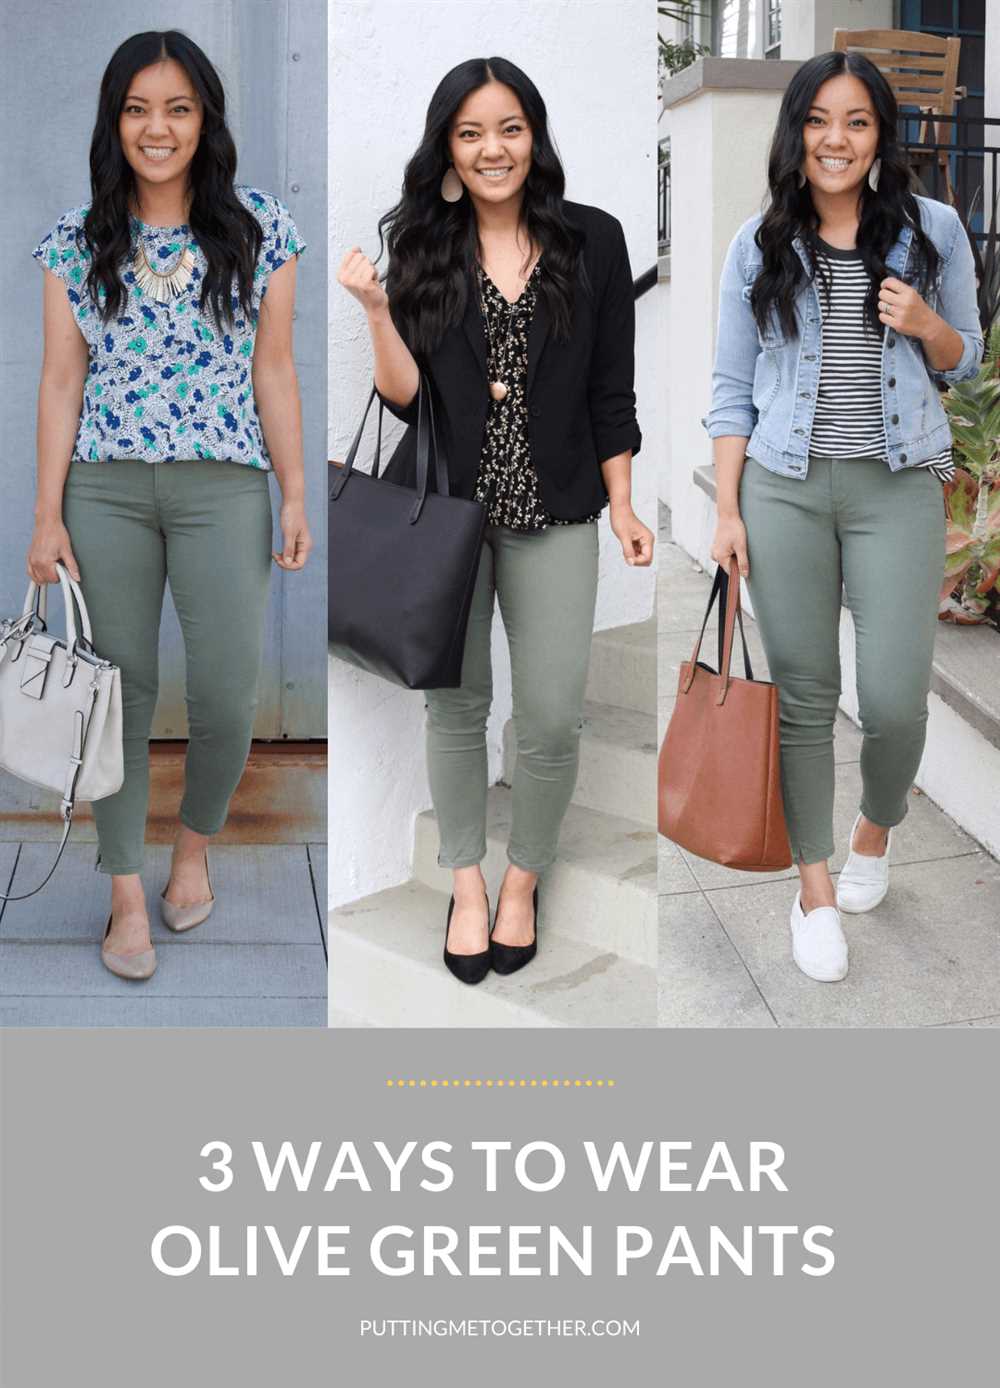 1. Casual Everyday Outfit